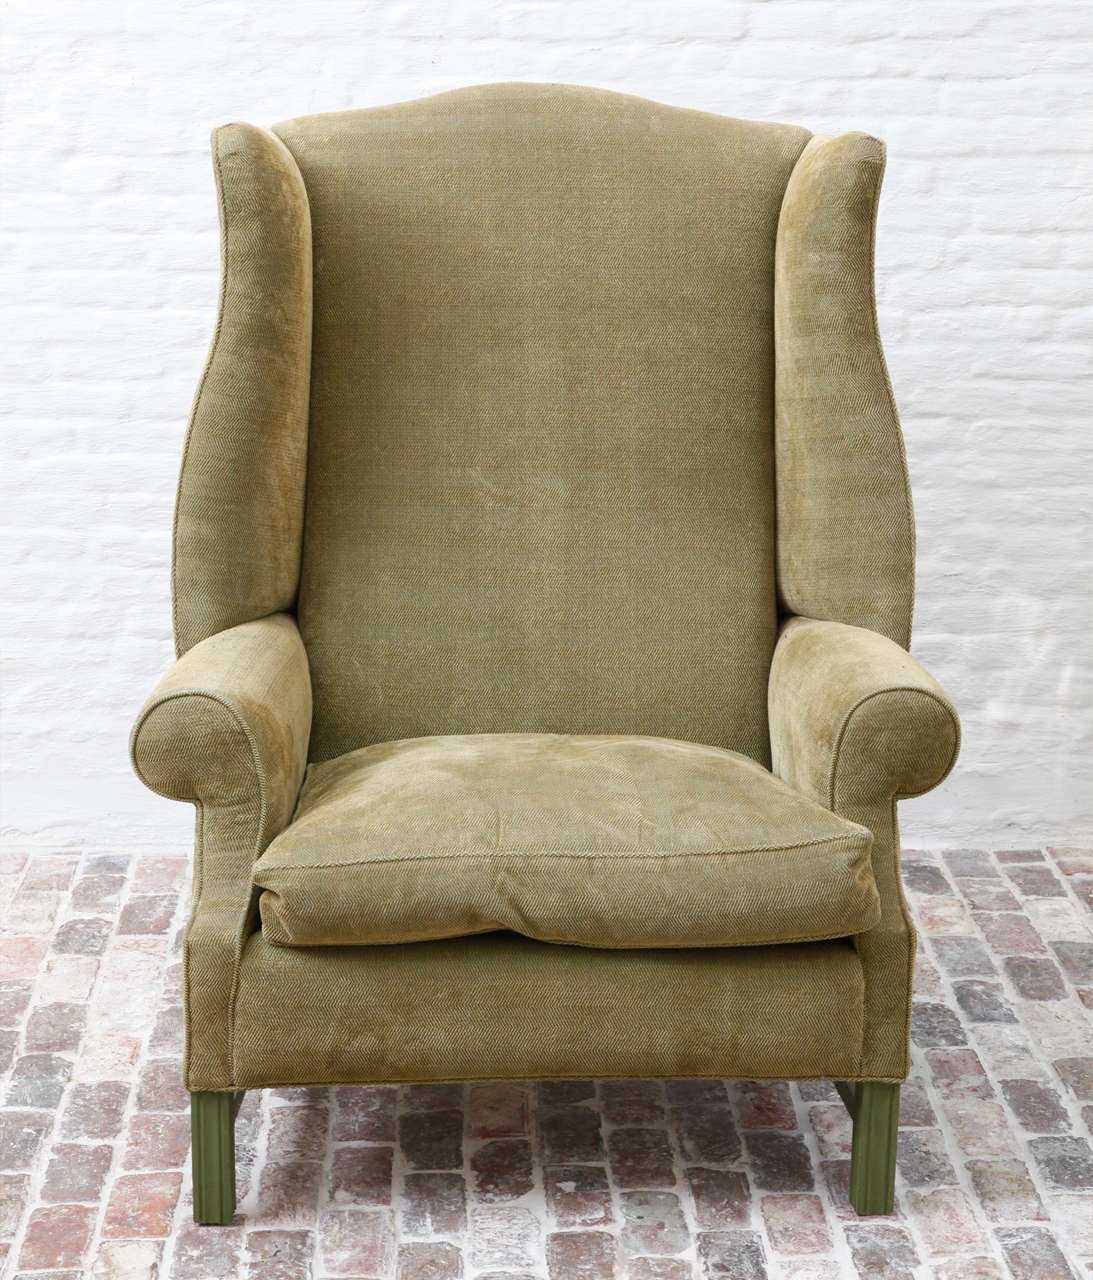 Green painted oversized English wingback armchair.